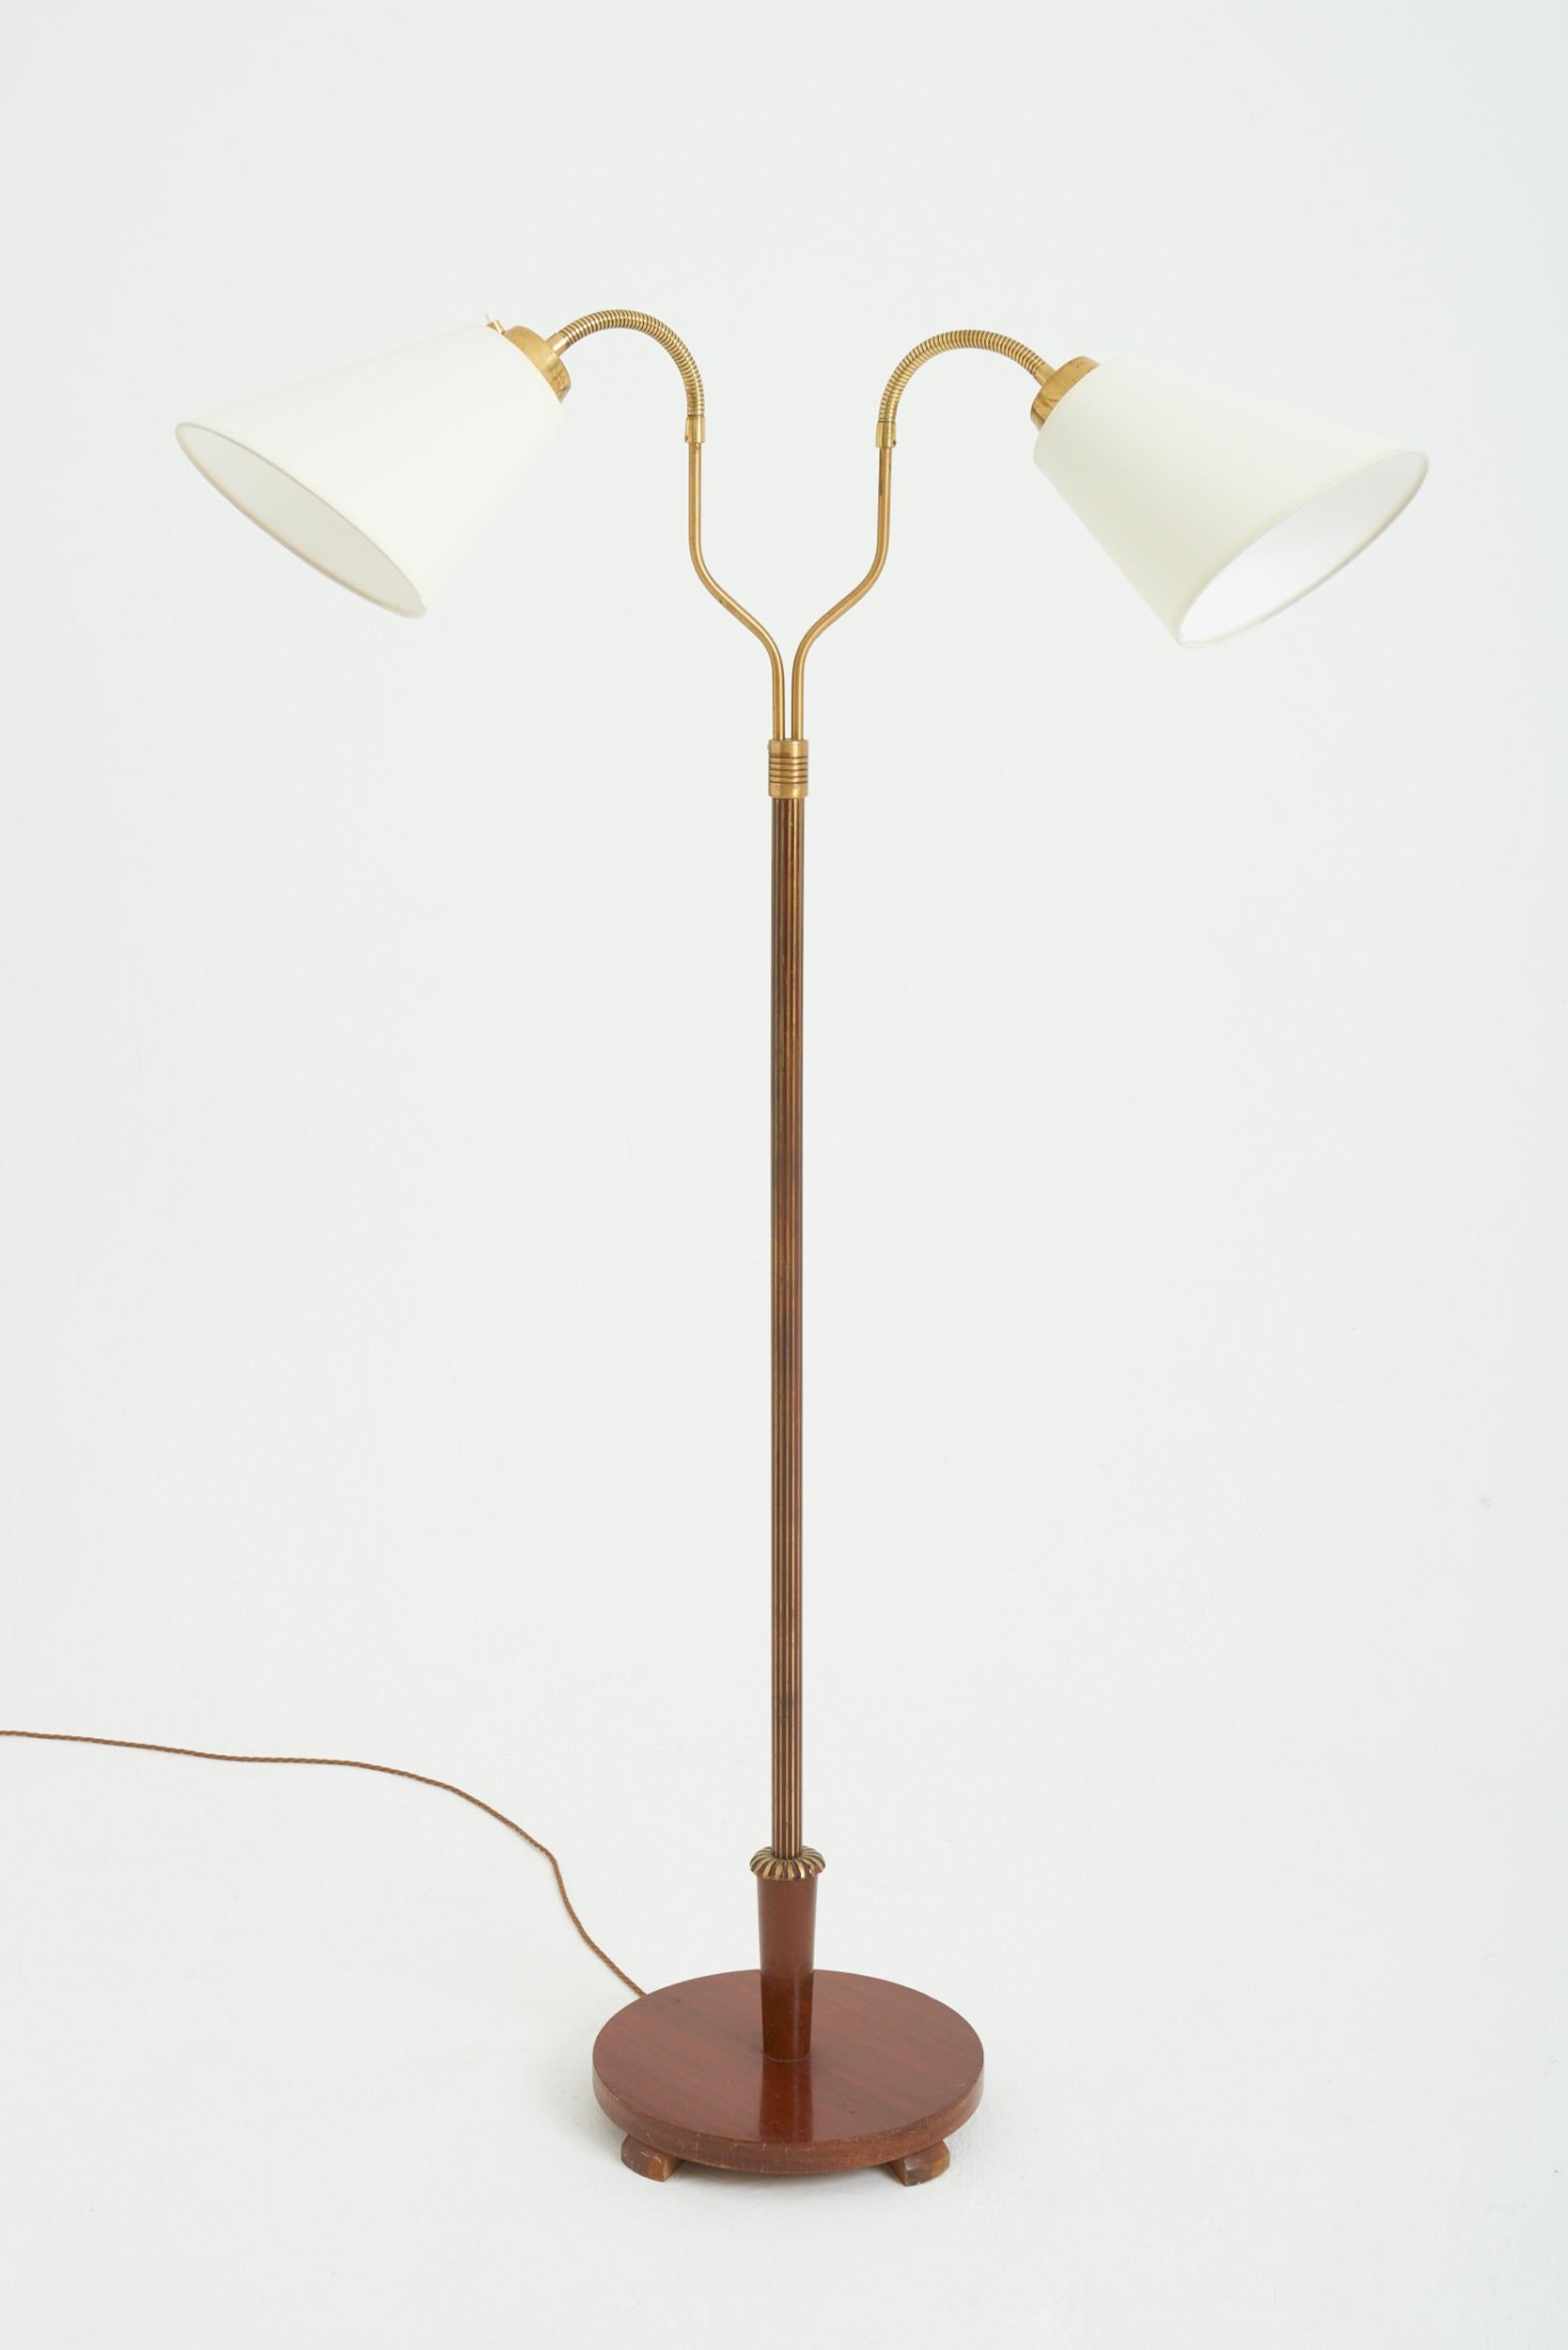 A two-armed brass and mahogany floor lamp
Sweden, Circa 1950
148 cm high by 79 cm wide by 41 cm depth